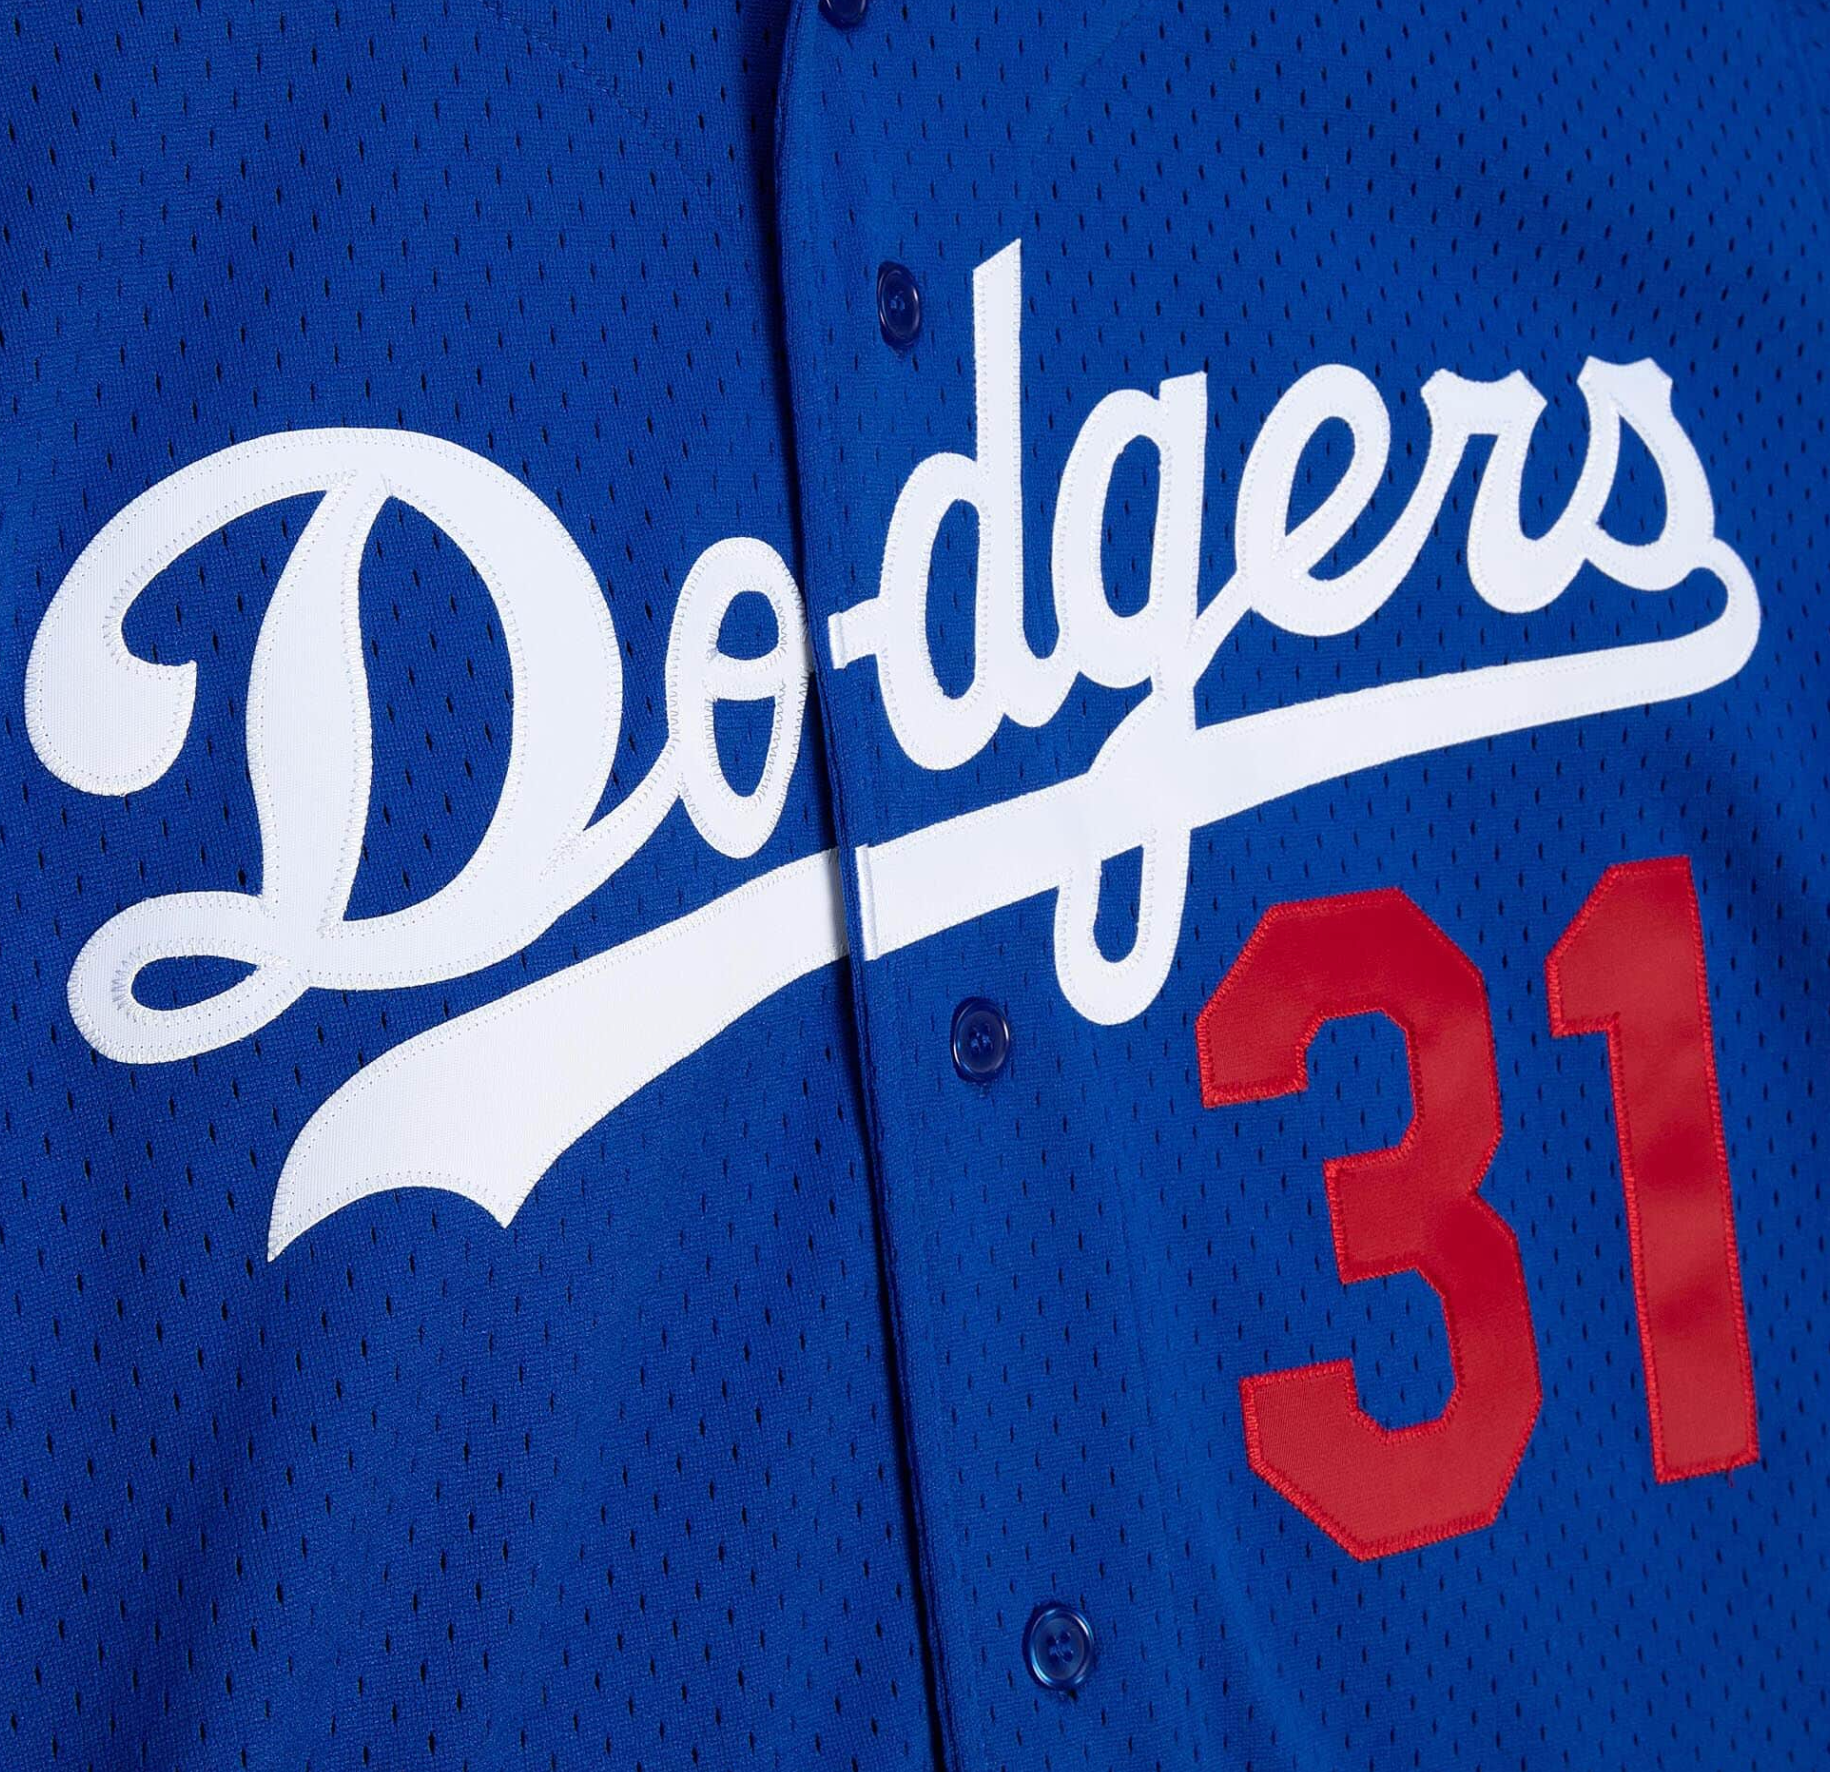 Mitchell and Ness Los Angeles Dodgers Authentic Jersey Royal